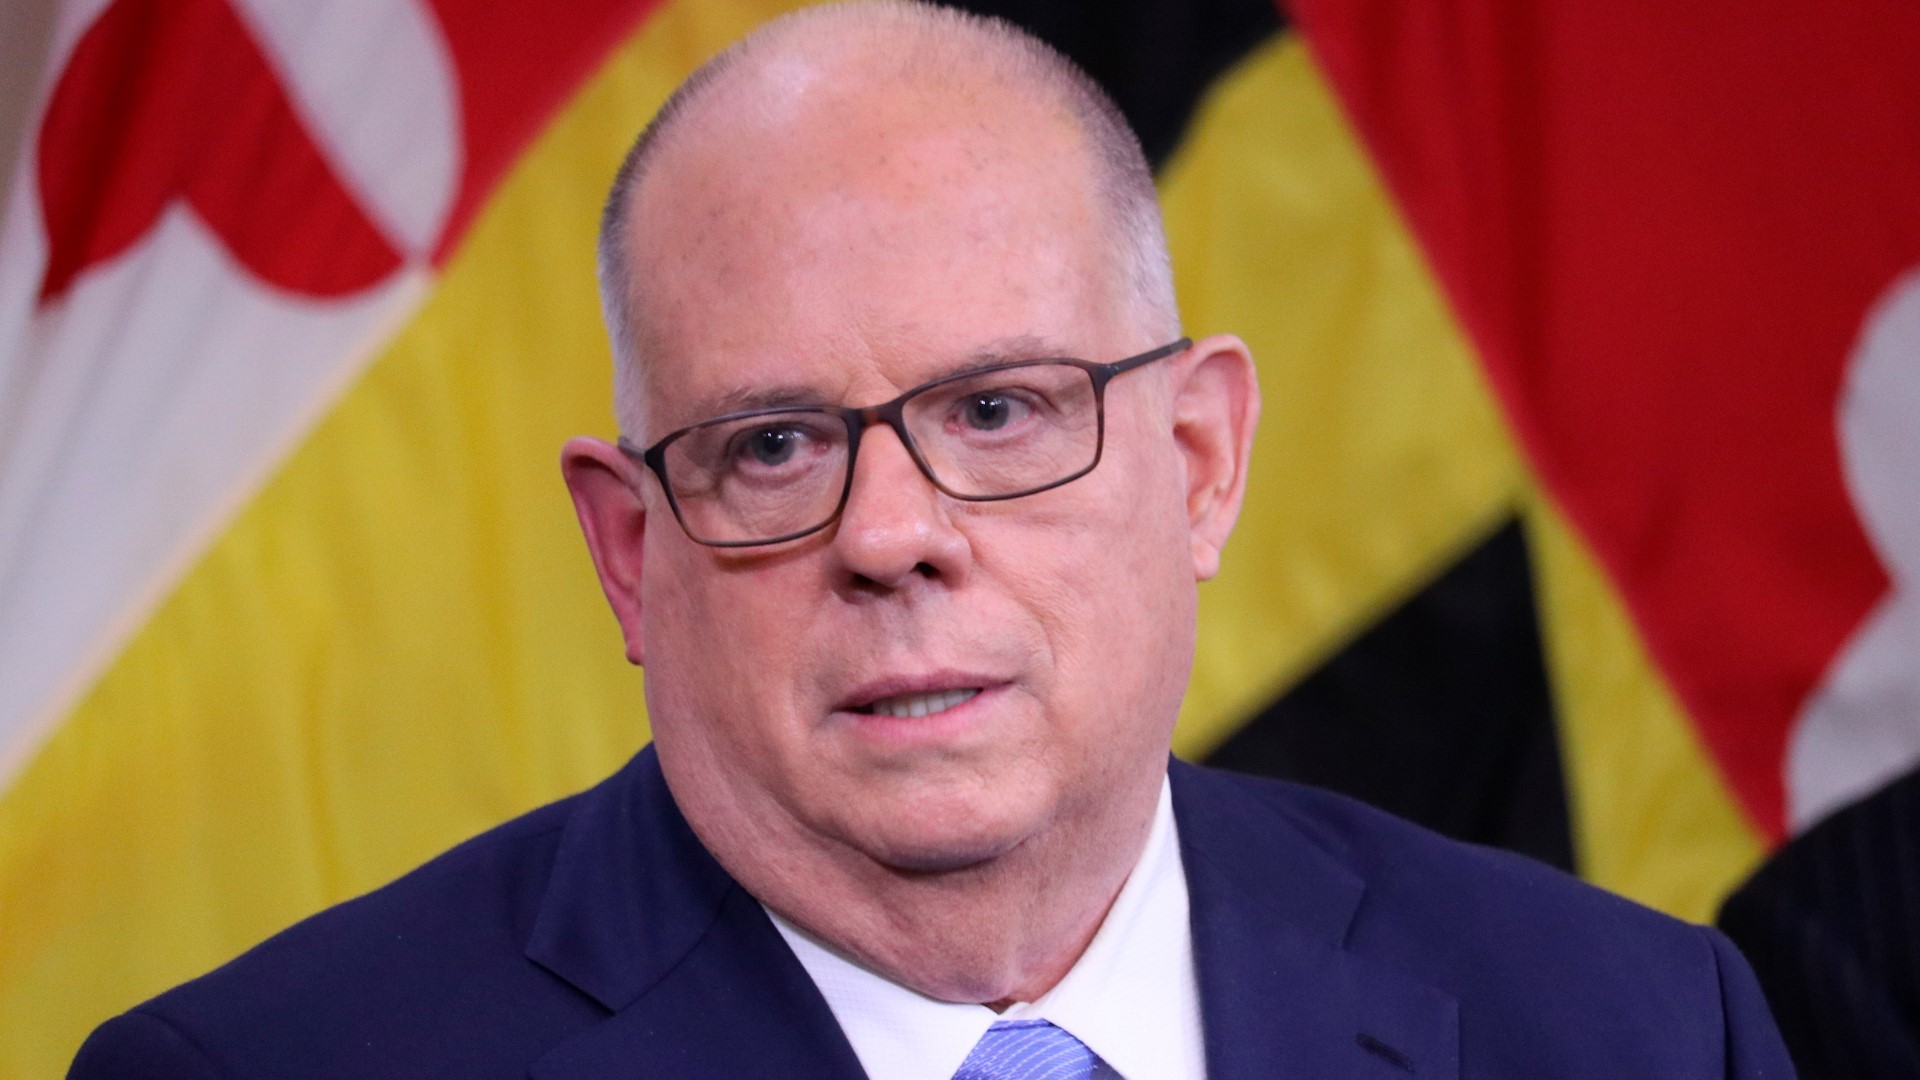 It is the second time Larry Hogan has had COVID.